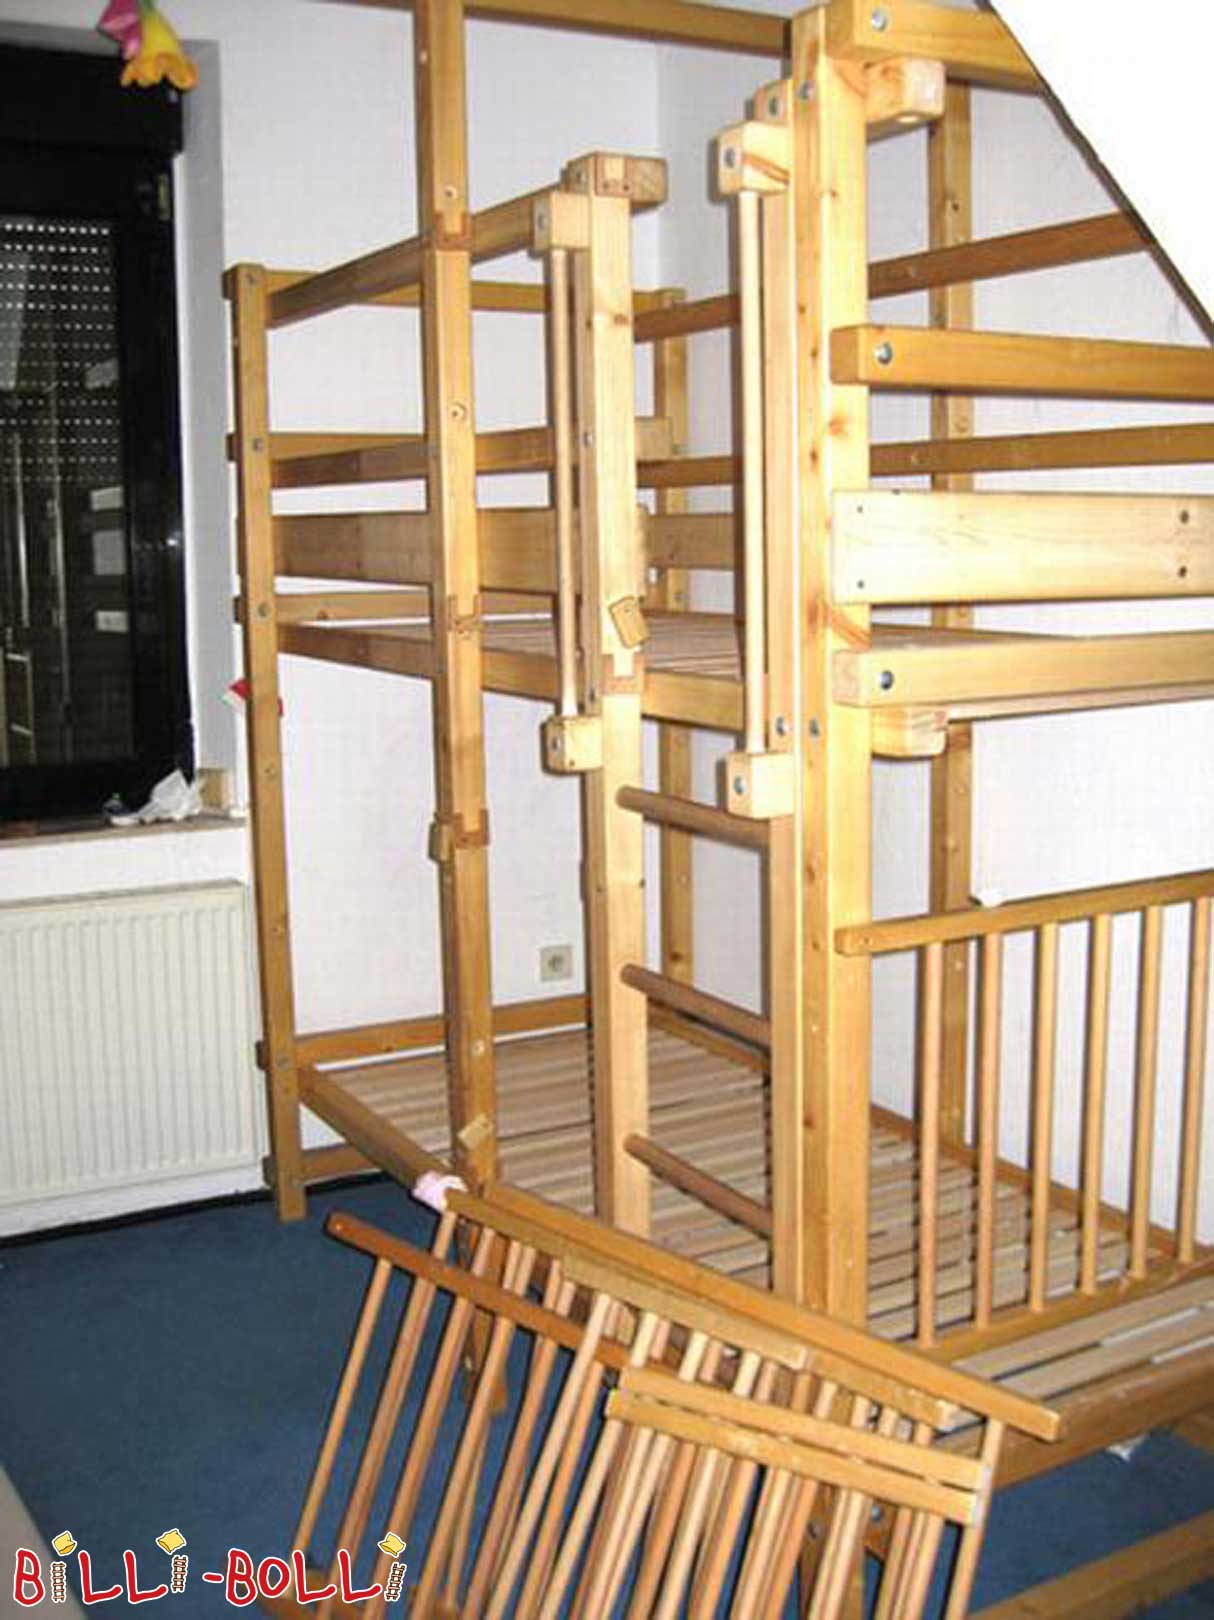 Billi-Bolli bunk bed (Category: second hand bunk bed)